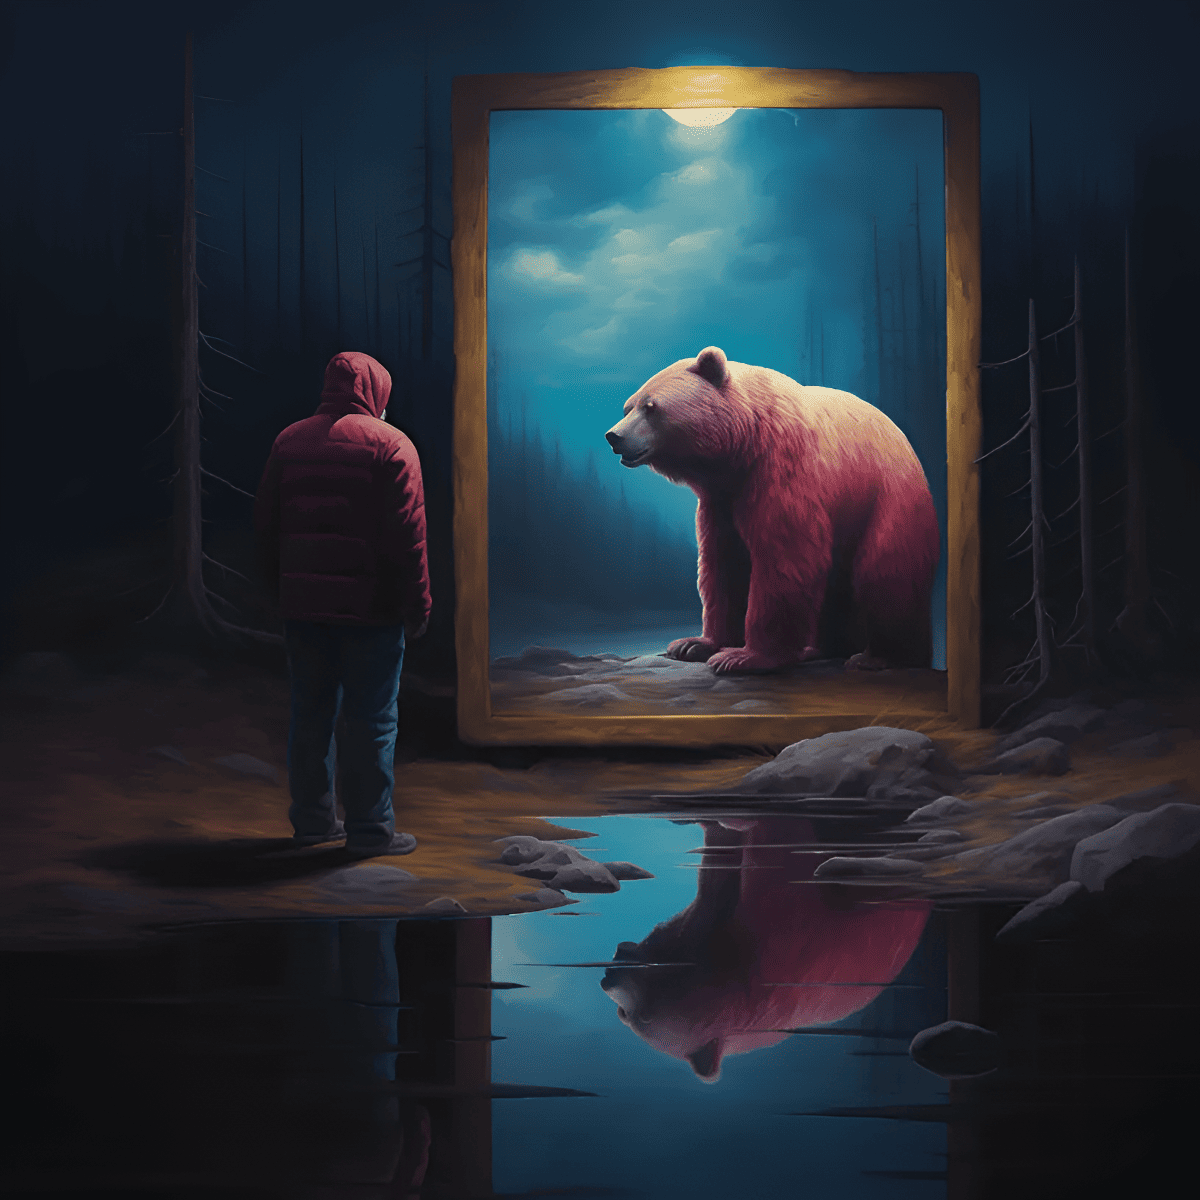 a man sees a bear in his reflection